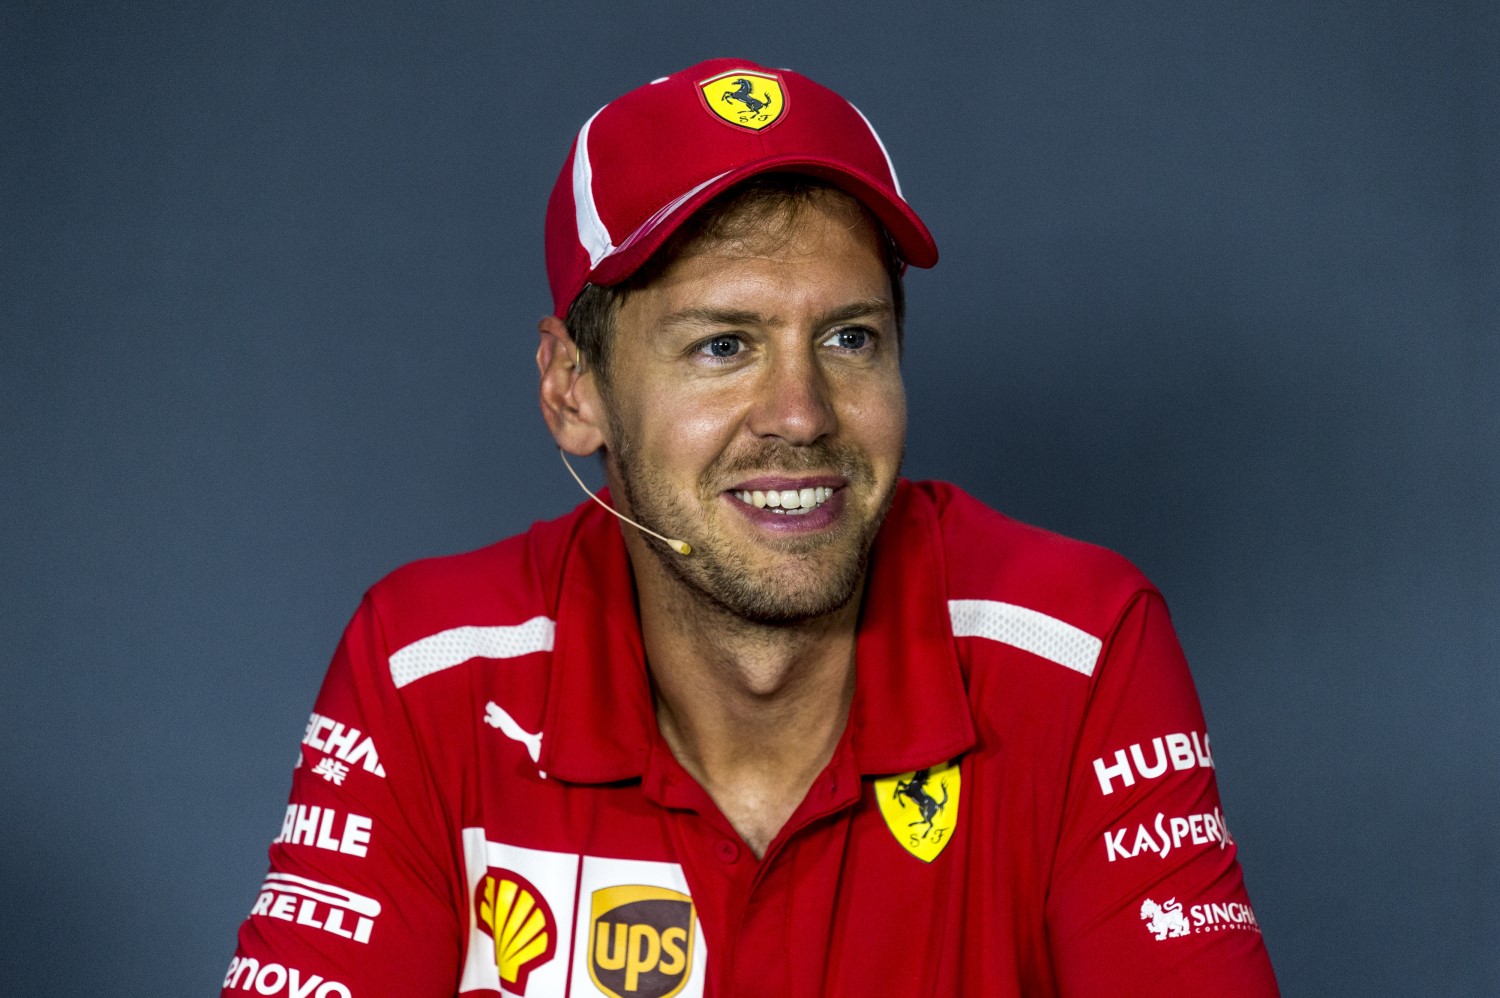 Vettel is in a good mood